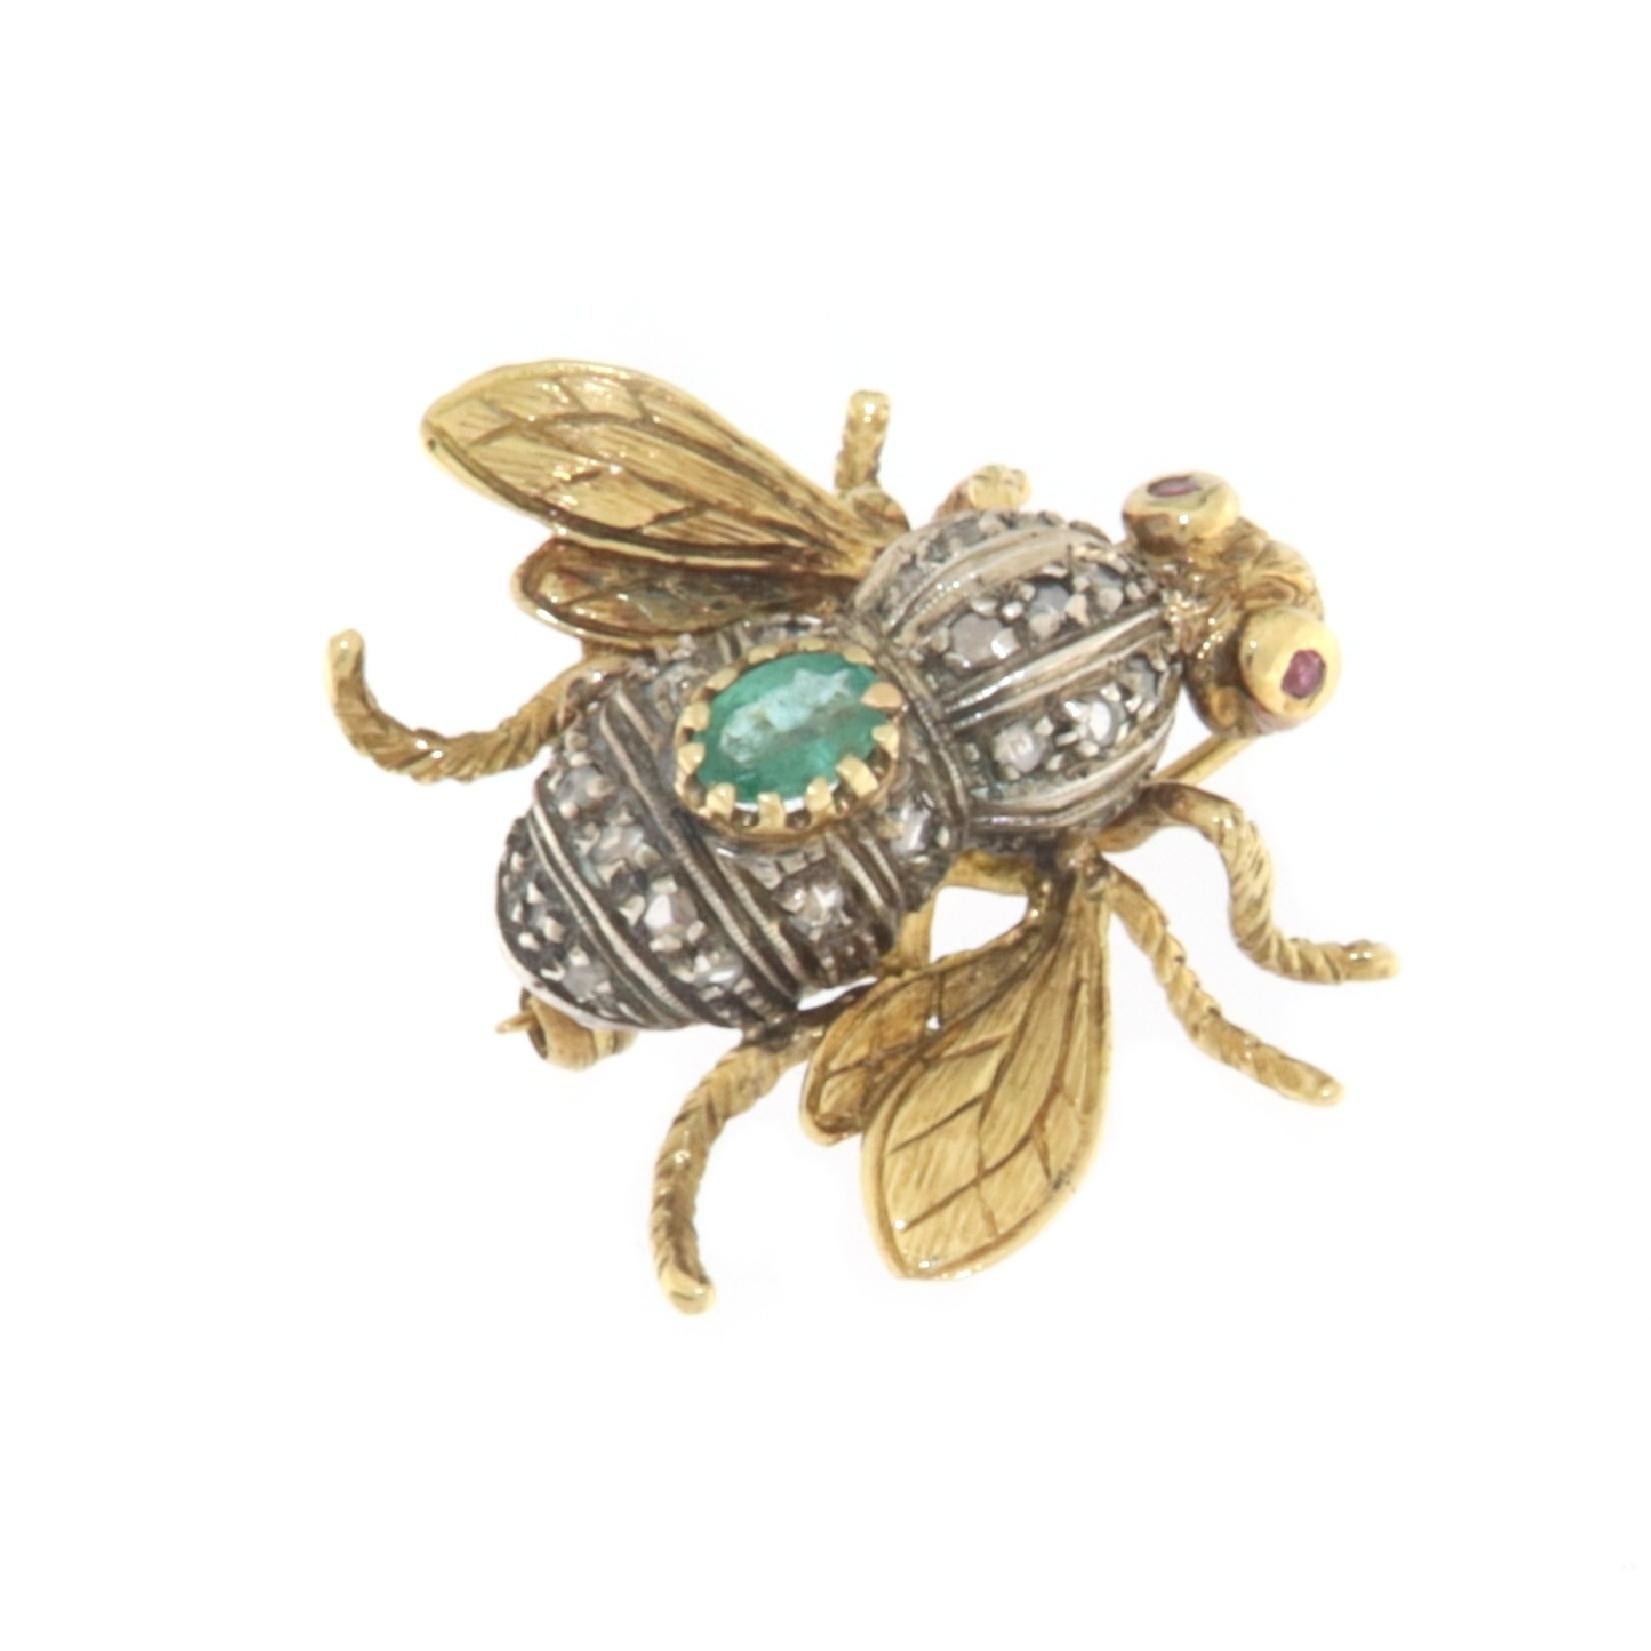 This fly-shaped brooch is a true masterpiece of jewelry, merging the charm of antiquity with a touch of modern flair. Exquisitely crafted in 18-karat yellow gold, this creation combines the timeless elegance of 800-millesimal silver, resulting in a